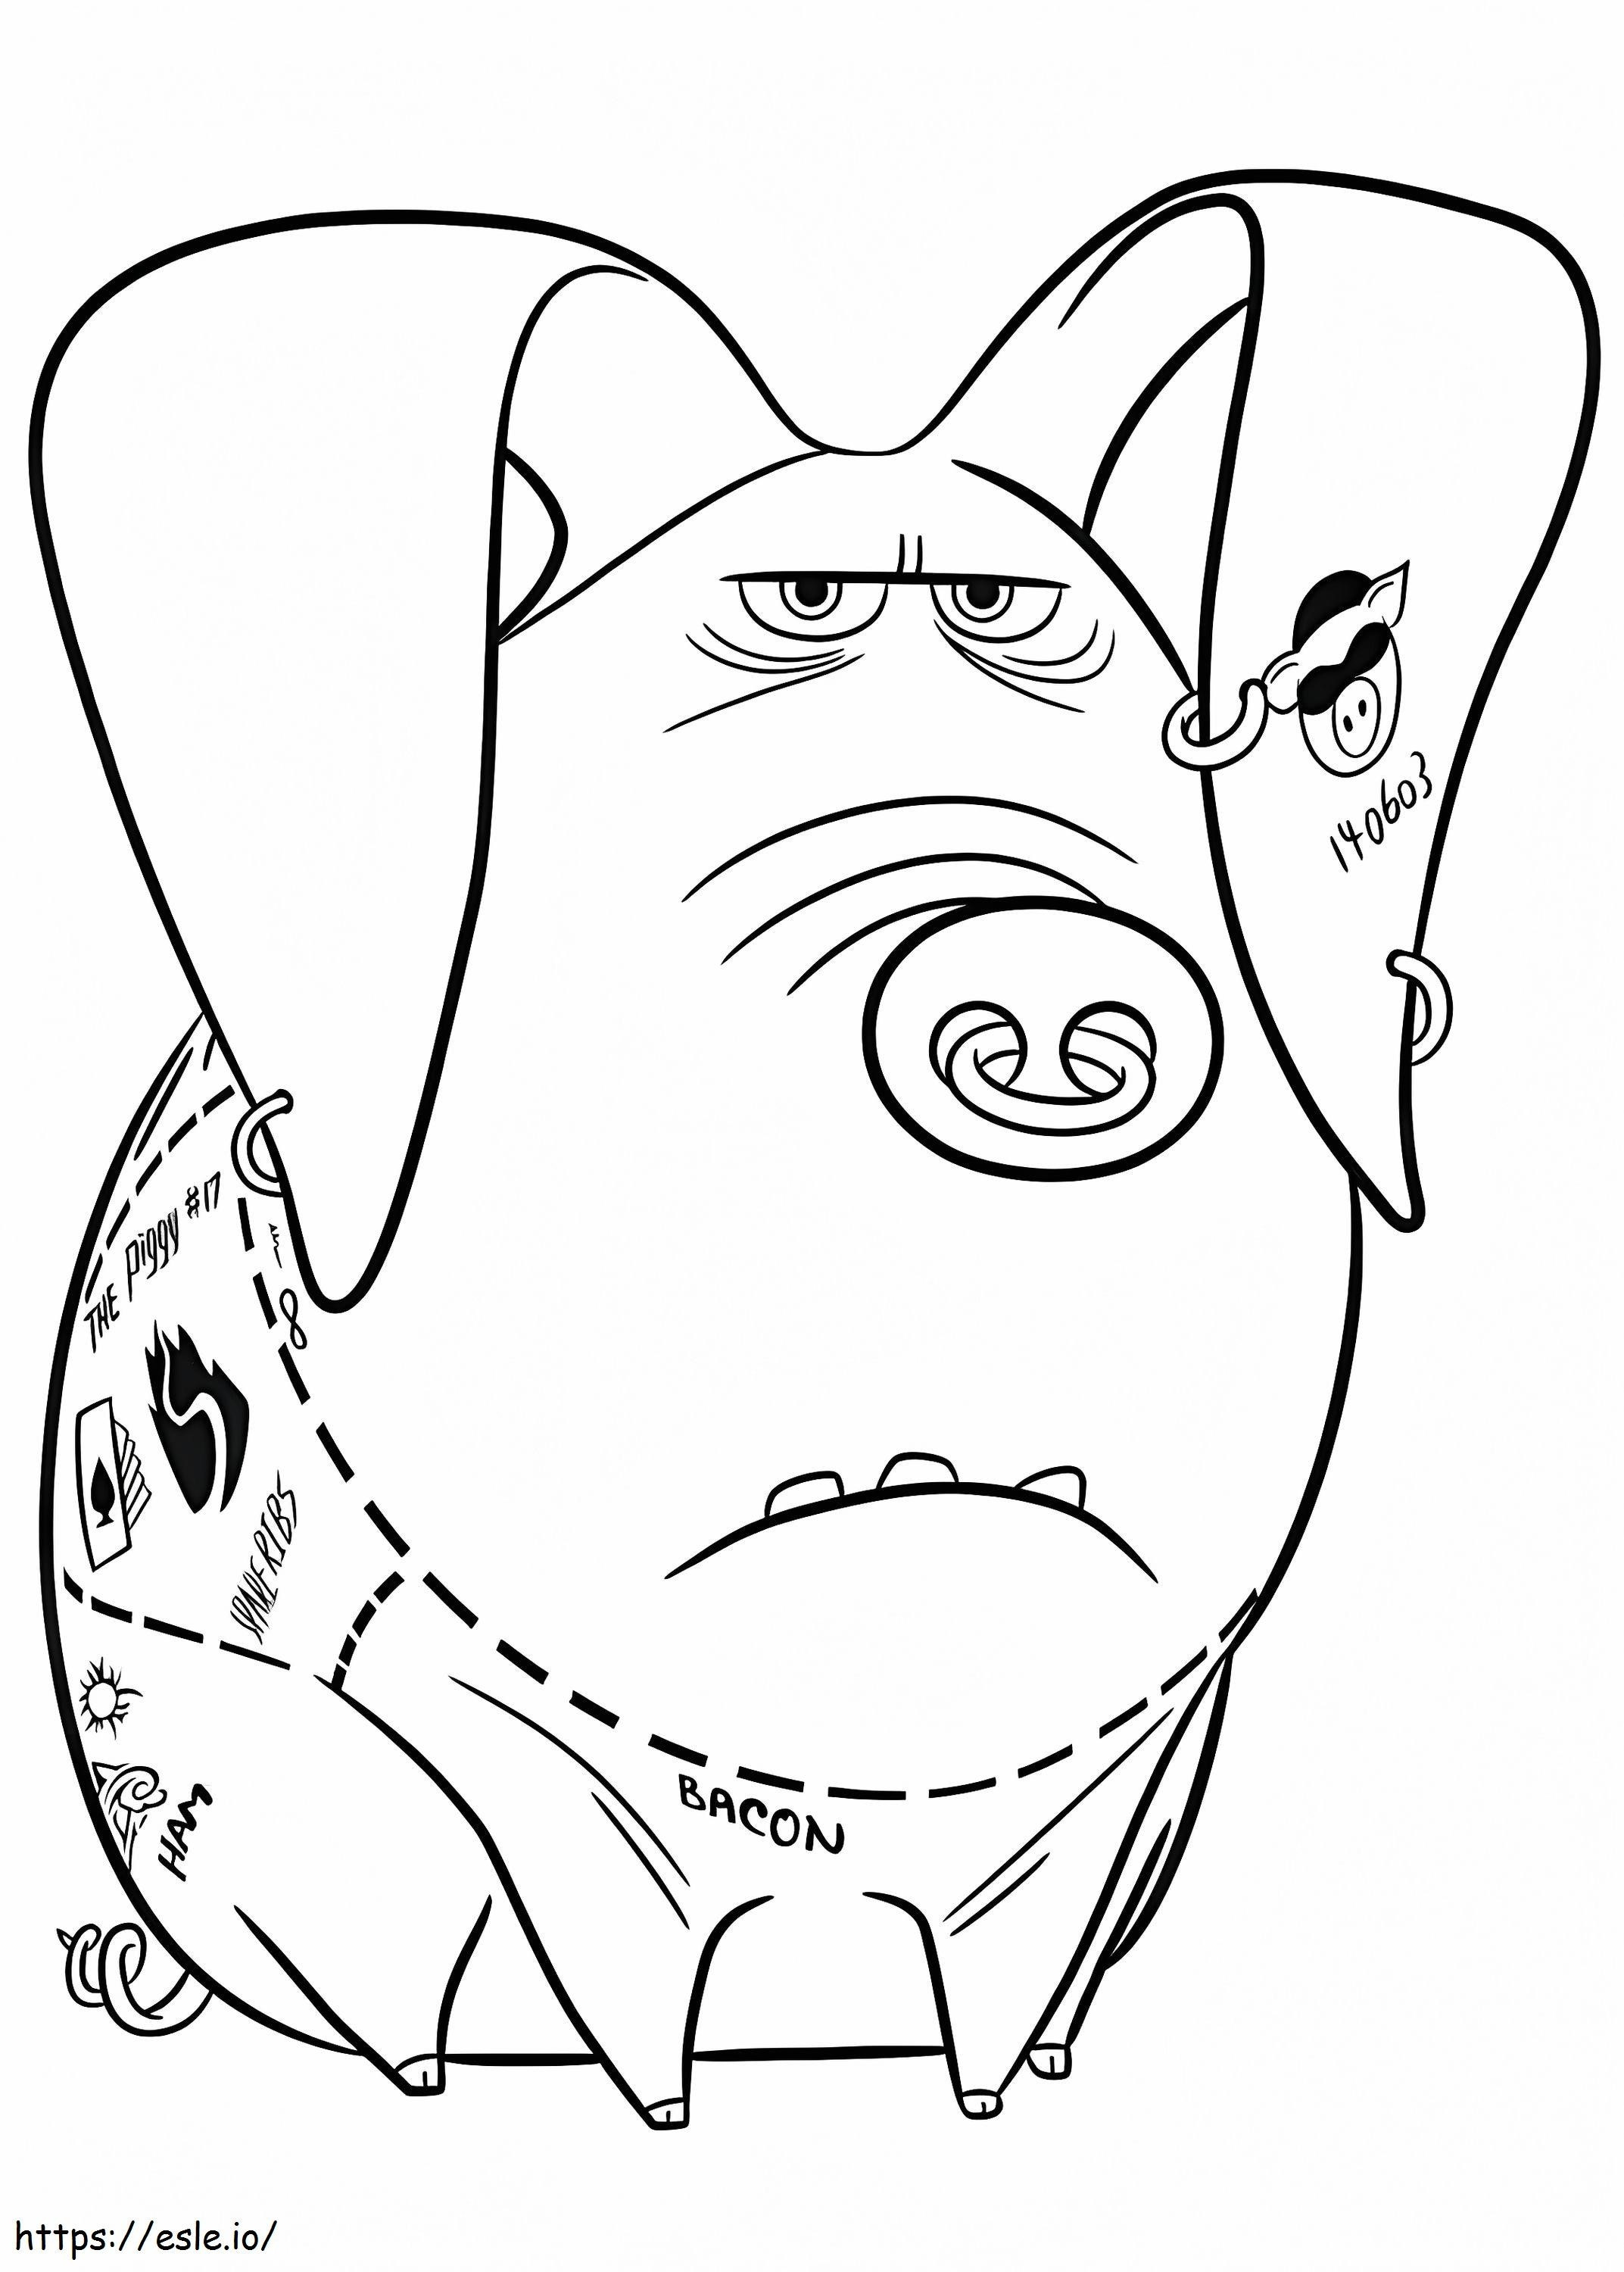 1559695702 Tattoo A4 coloring page